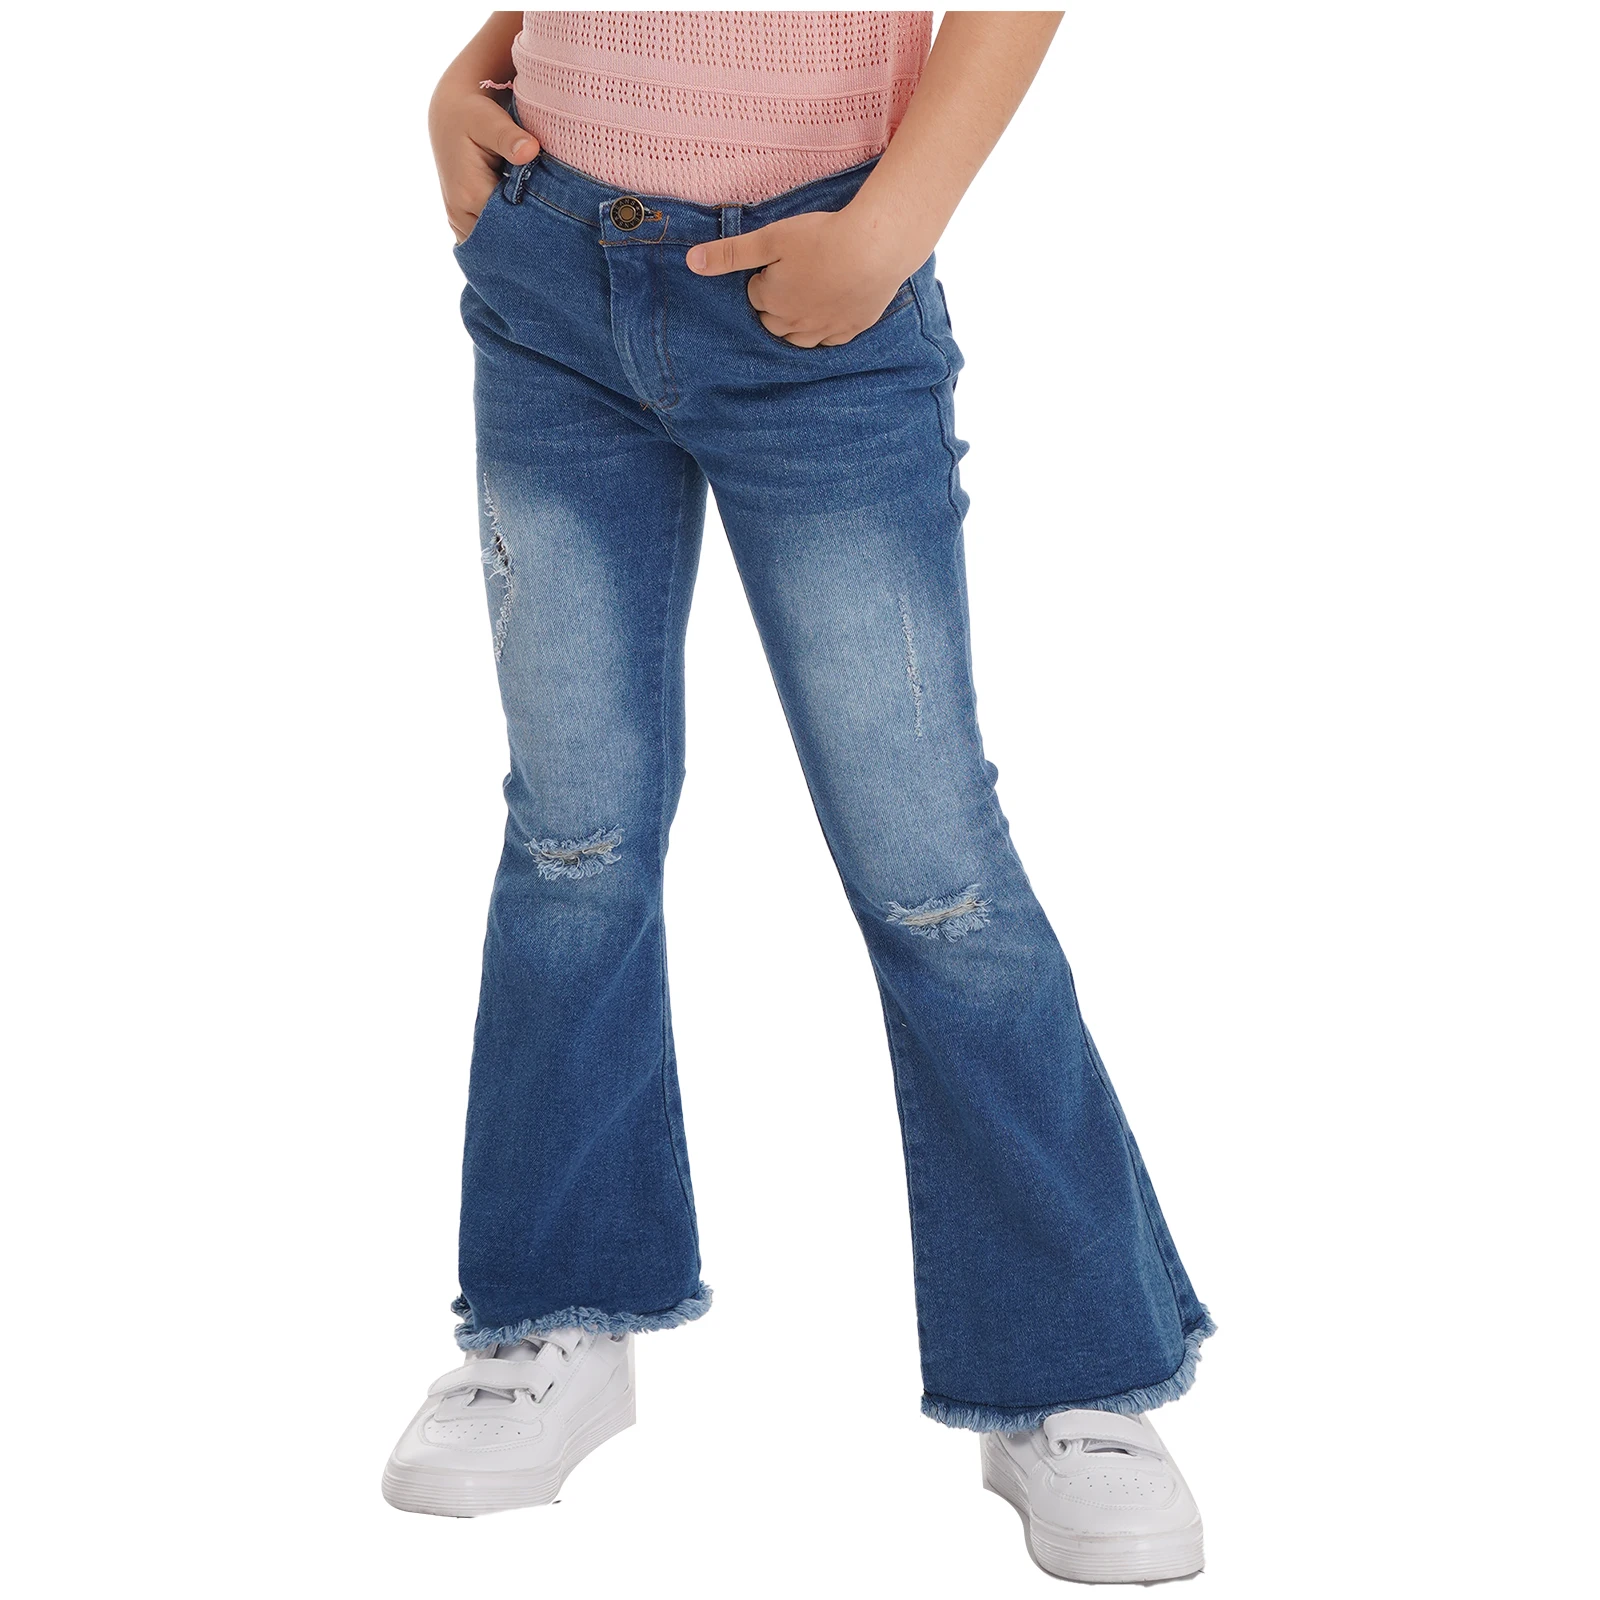 2023 New Kids Girls Flare Jeans Pants Spring Autumn Denim Zipper Closure Crotch Ripped Bell-bottom Long Pants Casual Trousers